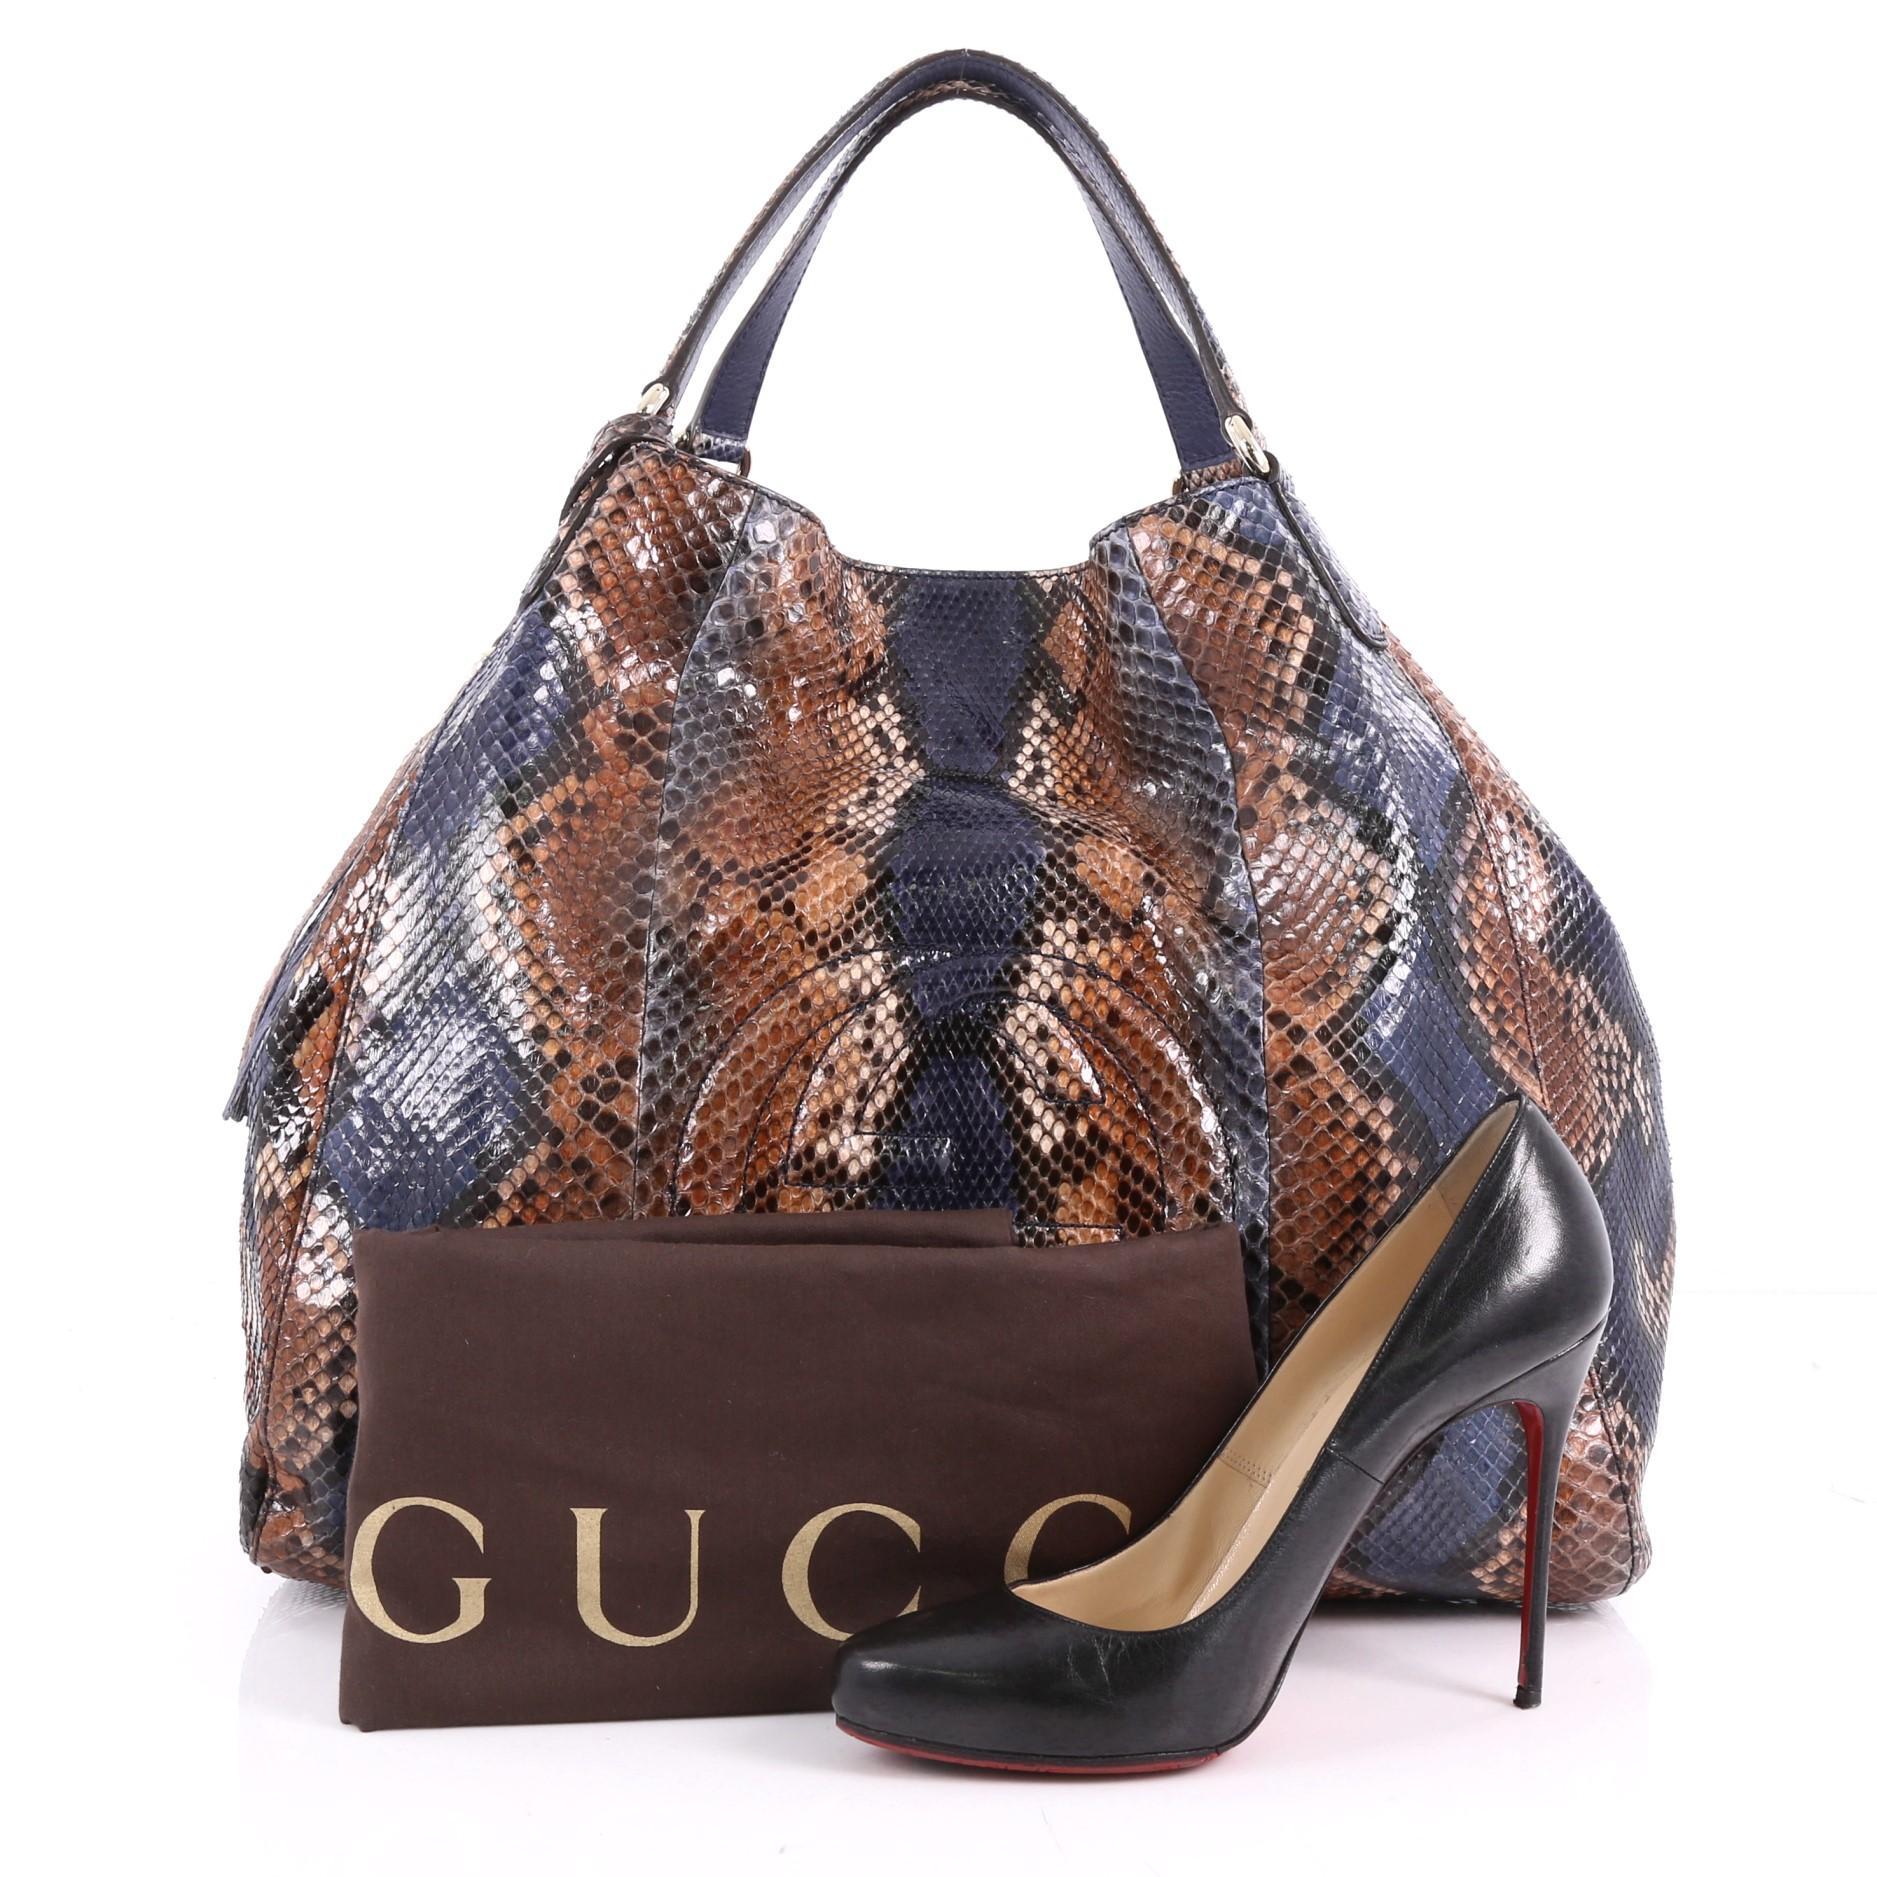 This authentic Gucci Soho Shoulder Bag Python Large is simple yet luxuriously stylish in design. Crafted from genuine brown and blue python skin, this hobo features dual flat handles, fringe tassels, protective base studs, signature interlocking